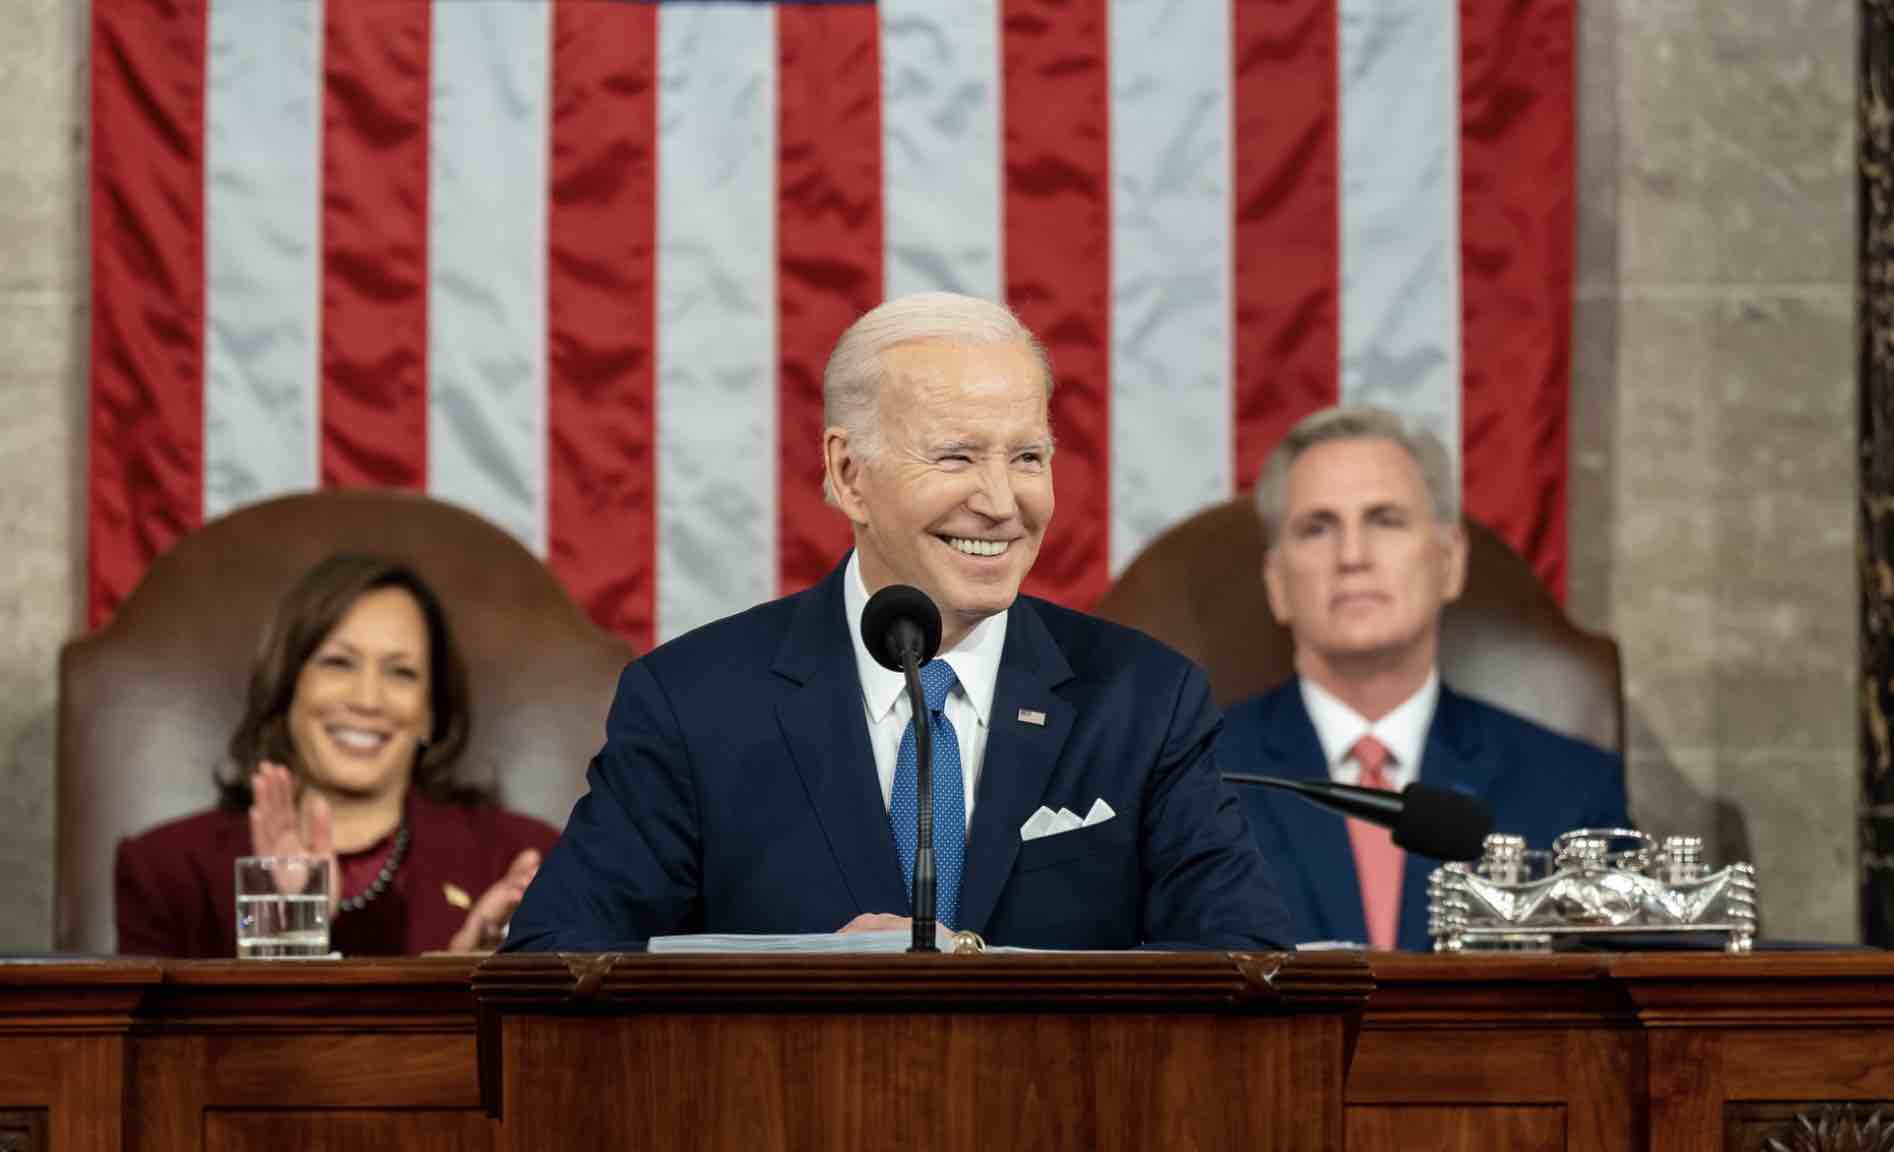 President Biden stands between Vice President Kamala harris and Speaker of the House Kevin McCarthy while delivering his state of the union speech.